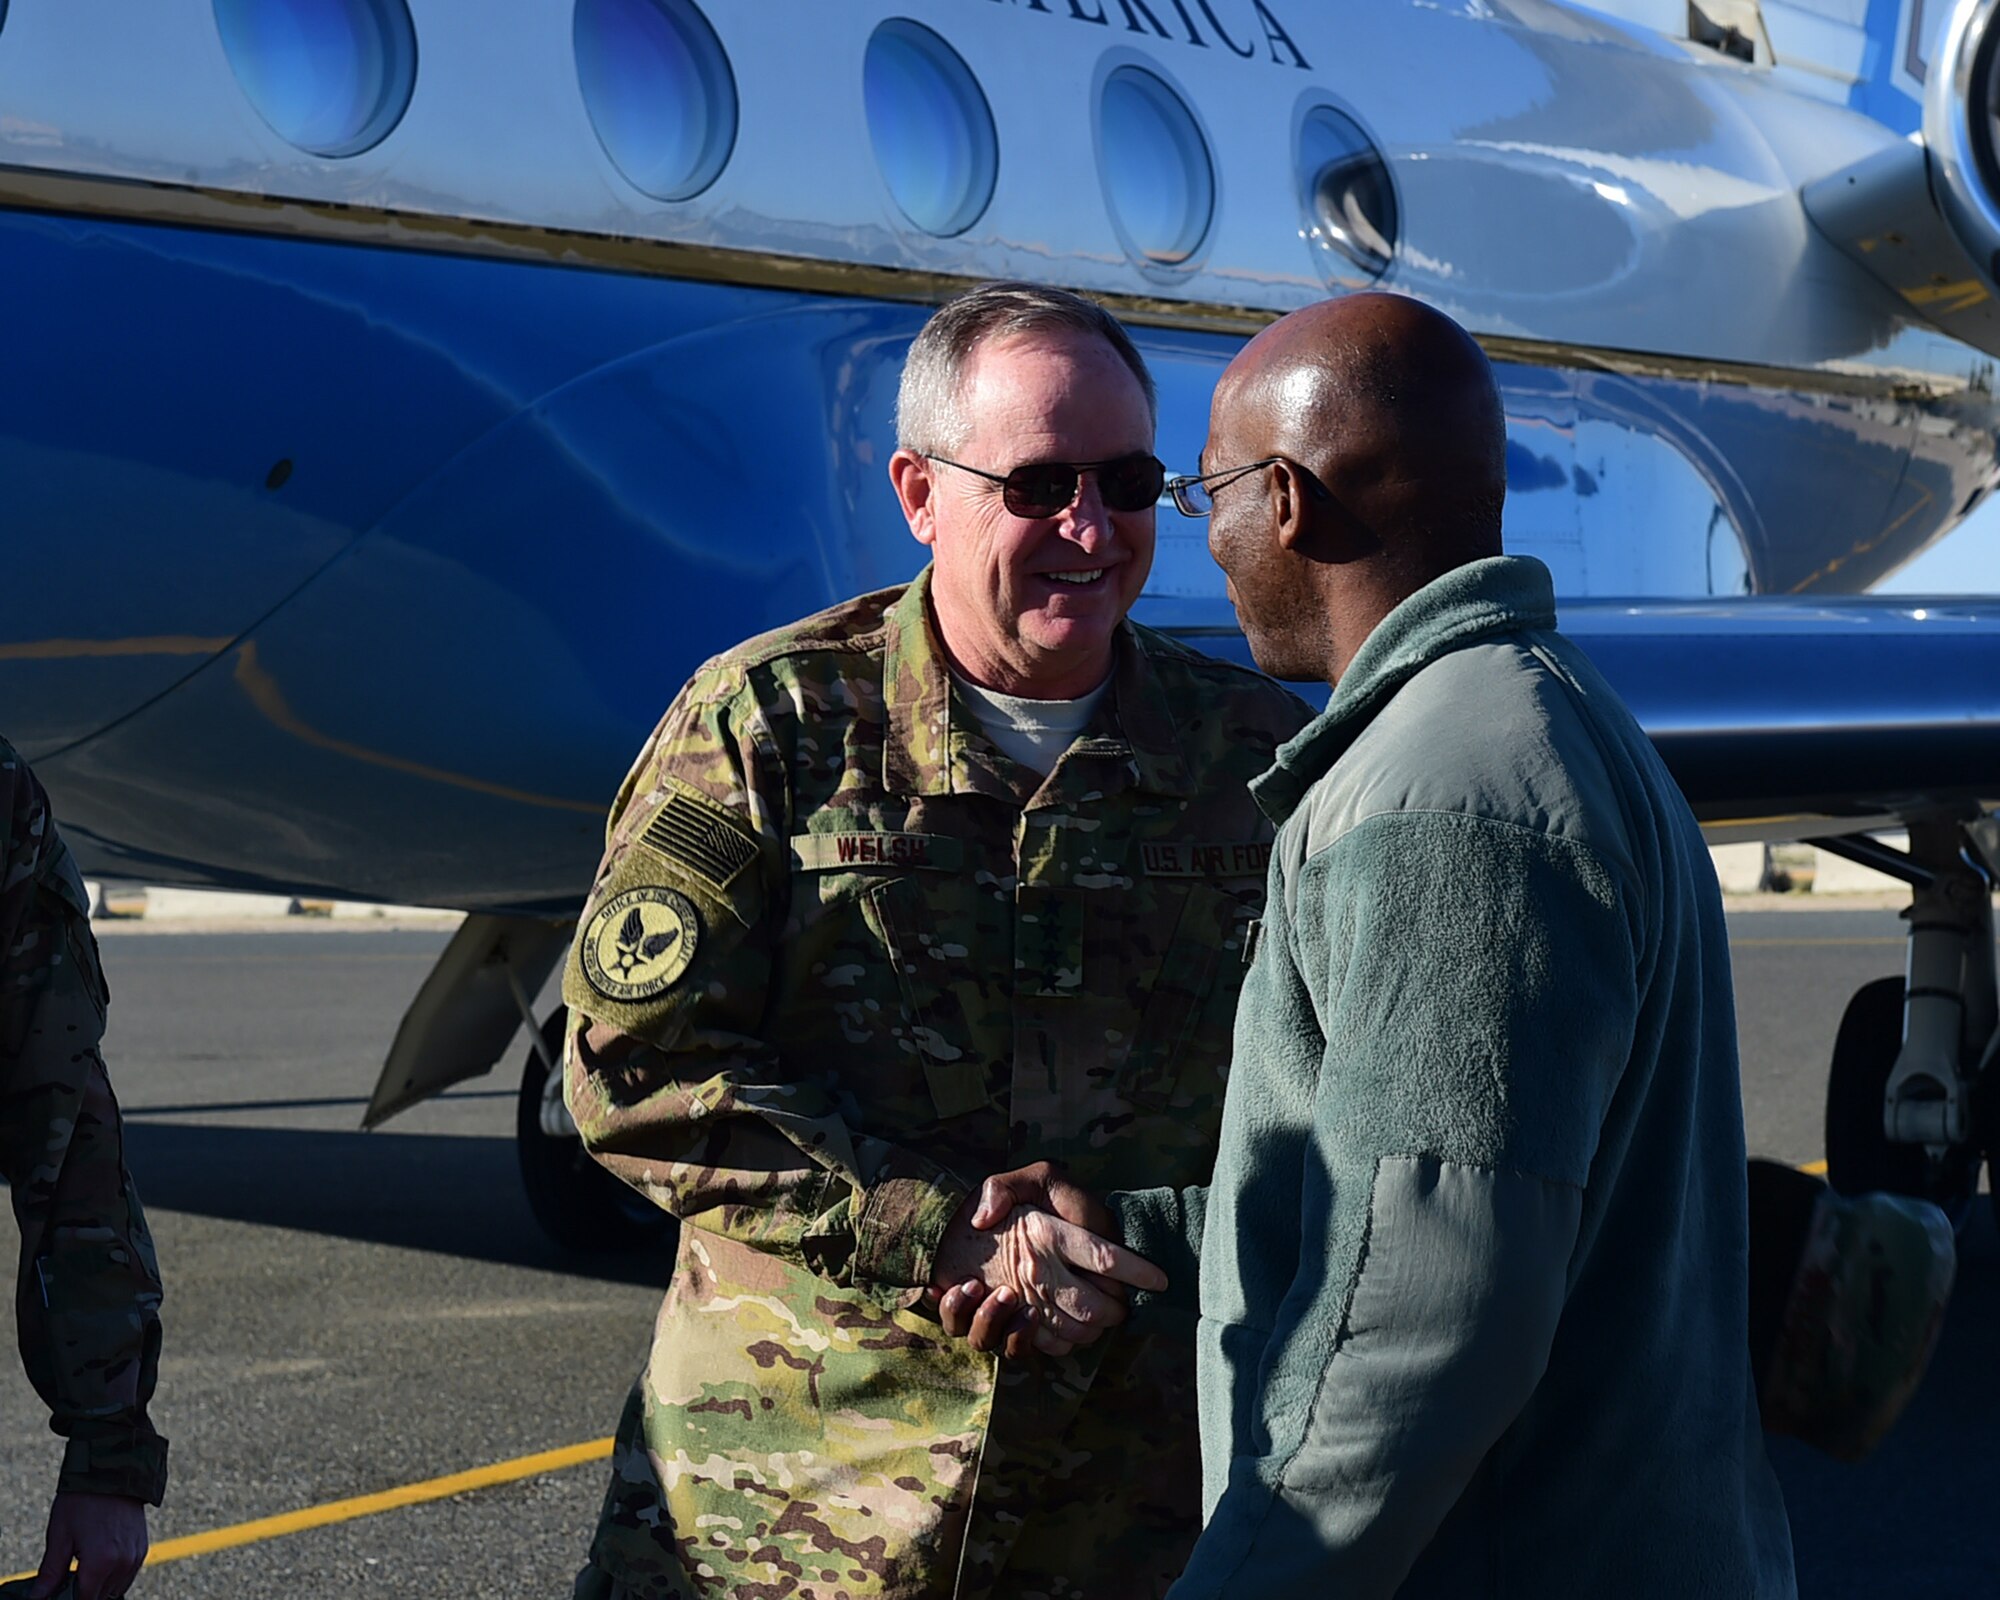 Col. Clarence Lukes Jr., 386th Air Expeditionary Wing commander, greets Chief of Staff of the Air Force Gen. Mark A. Welsh III upon arrival on the flightline at an undisclosed location in Southwest Asia Dec. 10, 2015. Welsh visited various bases in the area of responsibility speaking with Airmen deployed in support of Operation INHERENT RESOLVE. (U.S. Air Force photo by Staff Sgt. Jerilyn Quintanilla)